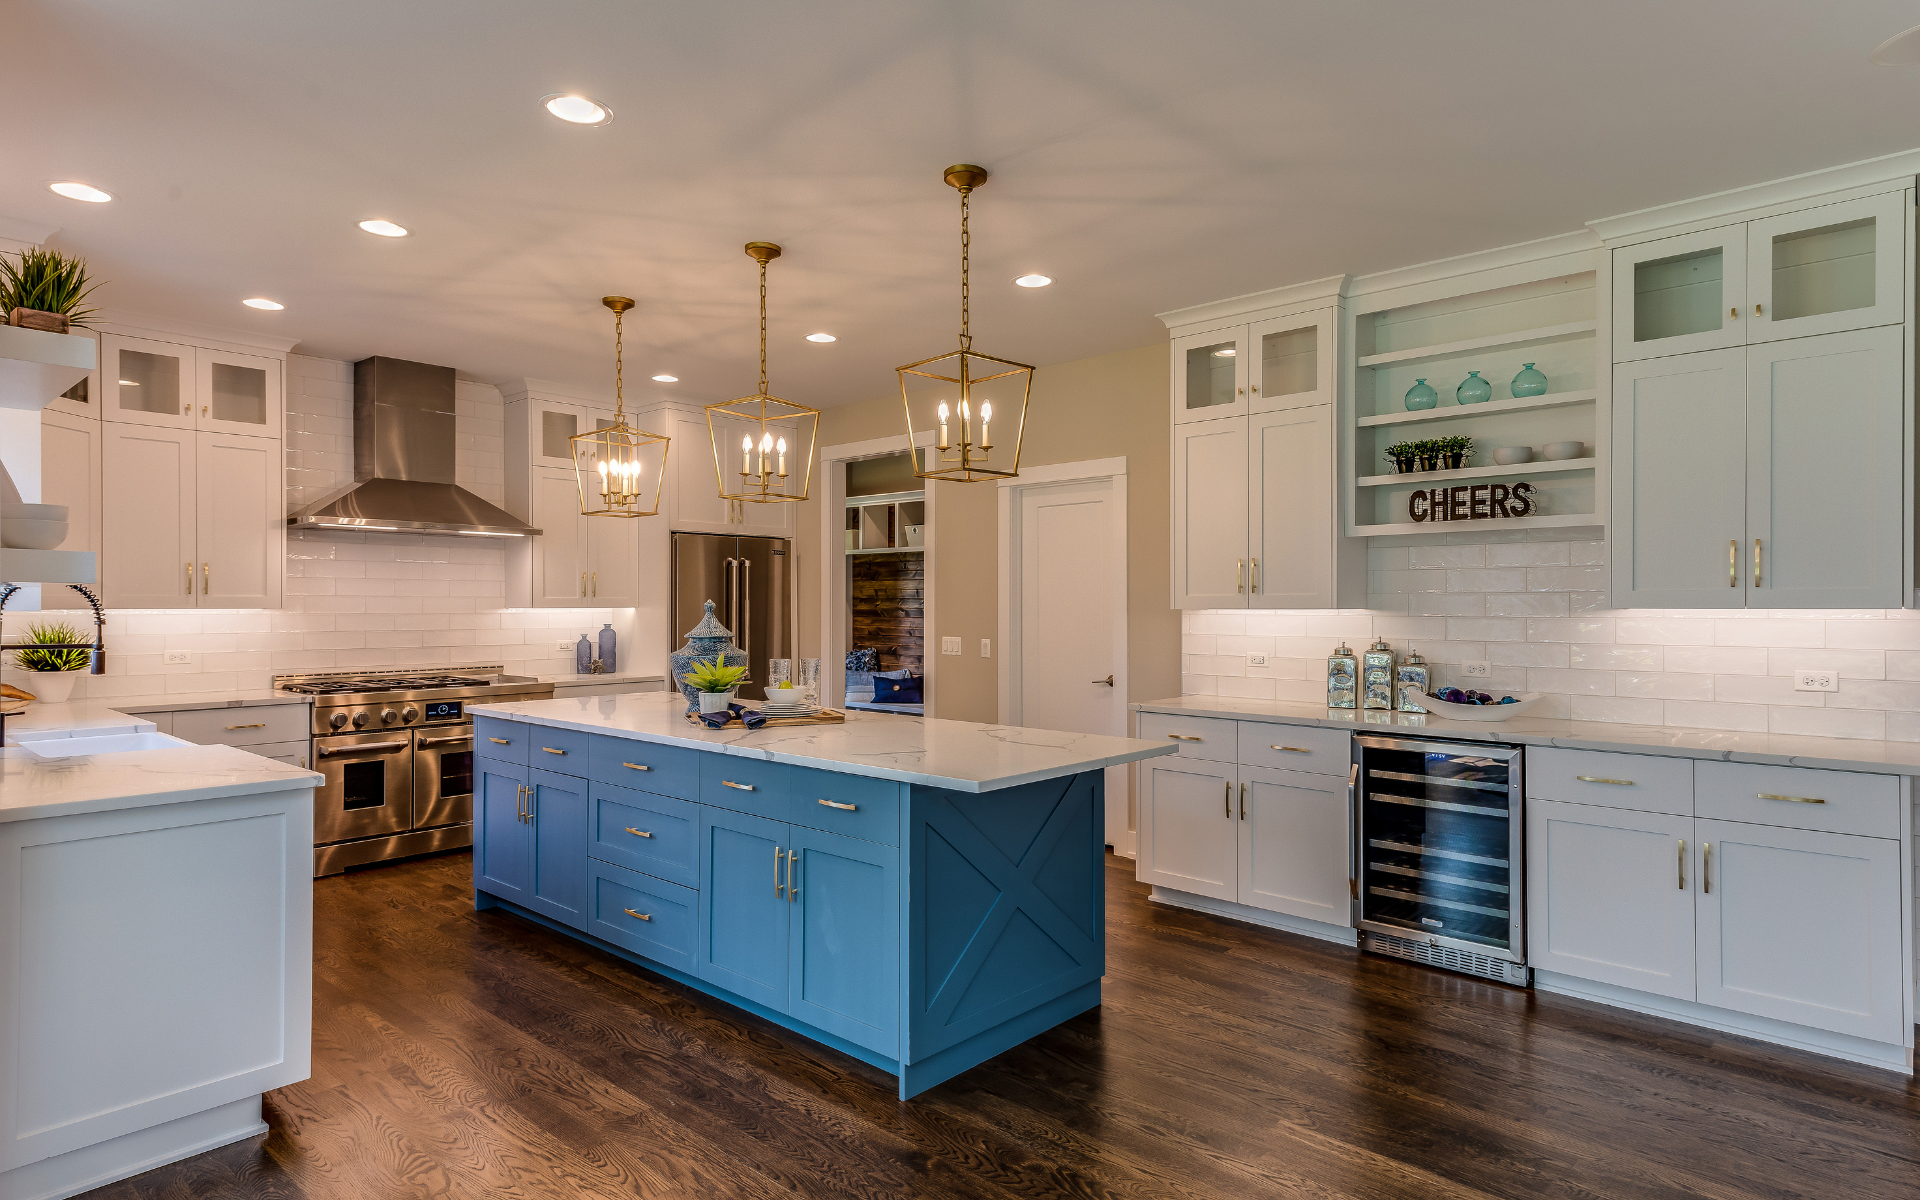 Spacious kitchen with white and blue inset cabinets